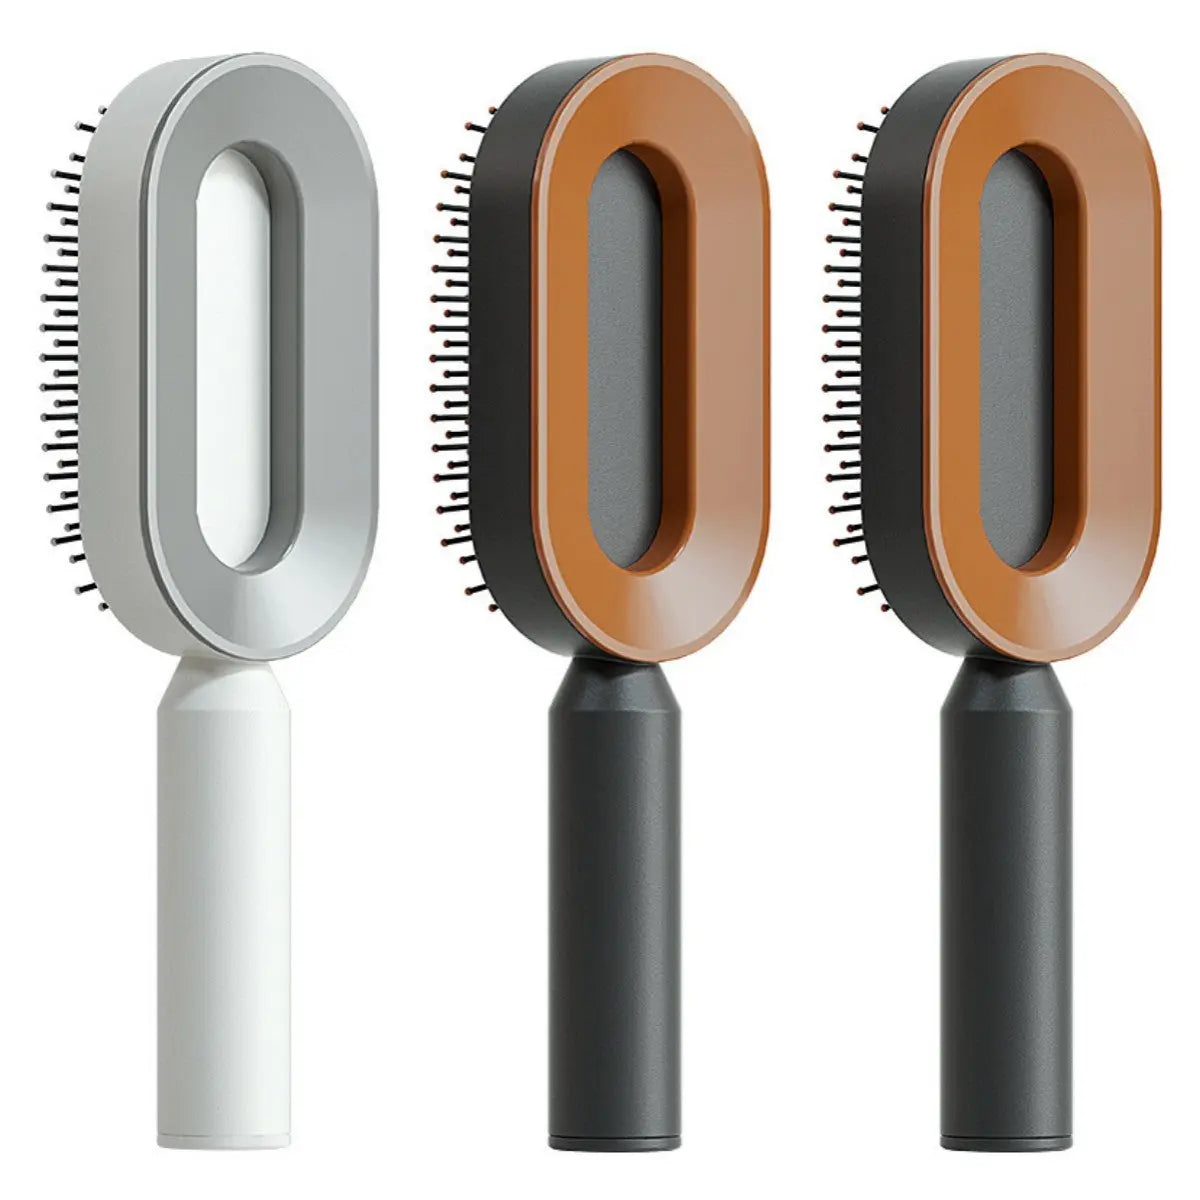 Self Cleaning Hair Brush For Women One-key Cleaning Hair Loss Airbag Massage Scalp Comb Anti-Static Hairbrush - Trending's Arena Beauty Self Cleaning Hair Brush For Women One-key Cleaning Hair Loss Airbag Massage Scalp Comb Anti-Static Hairbrush FACE Set-T